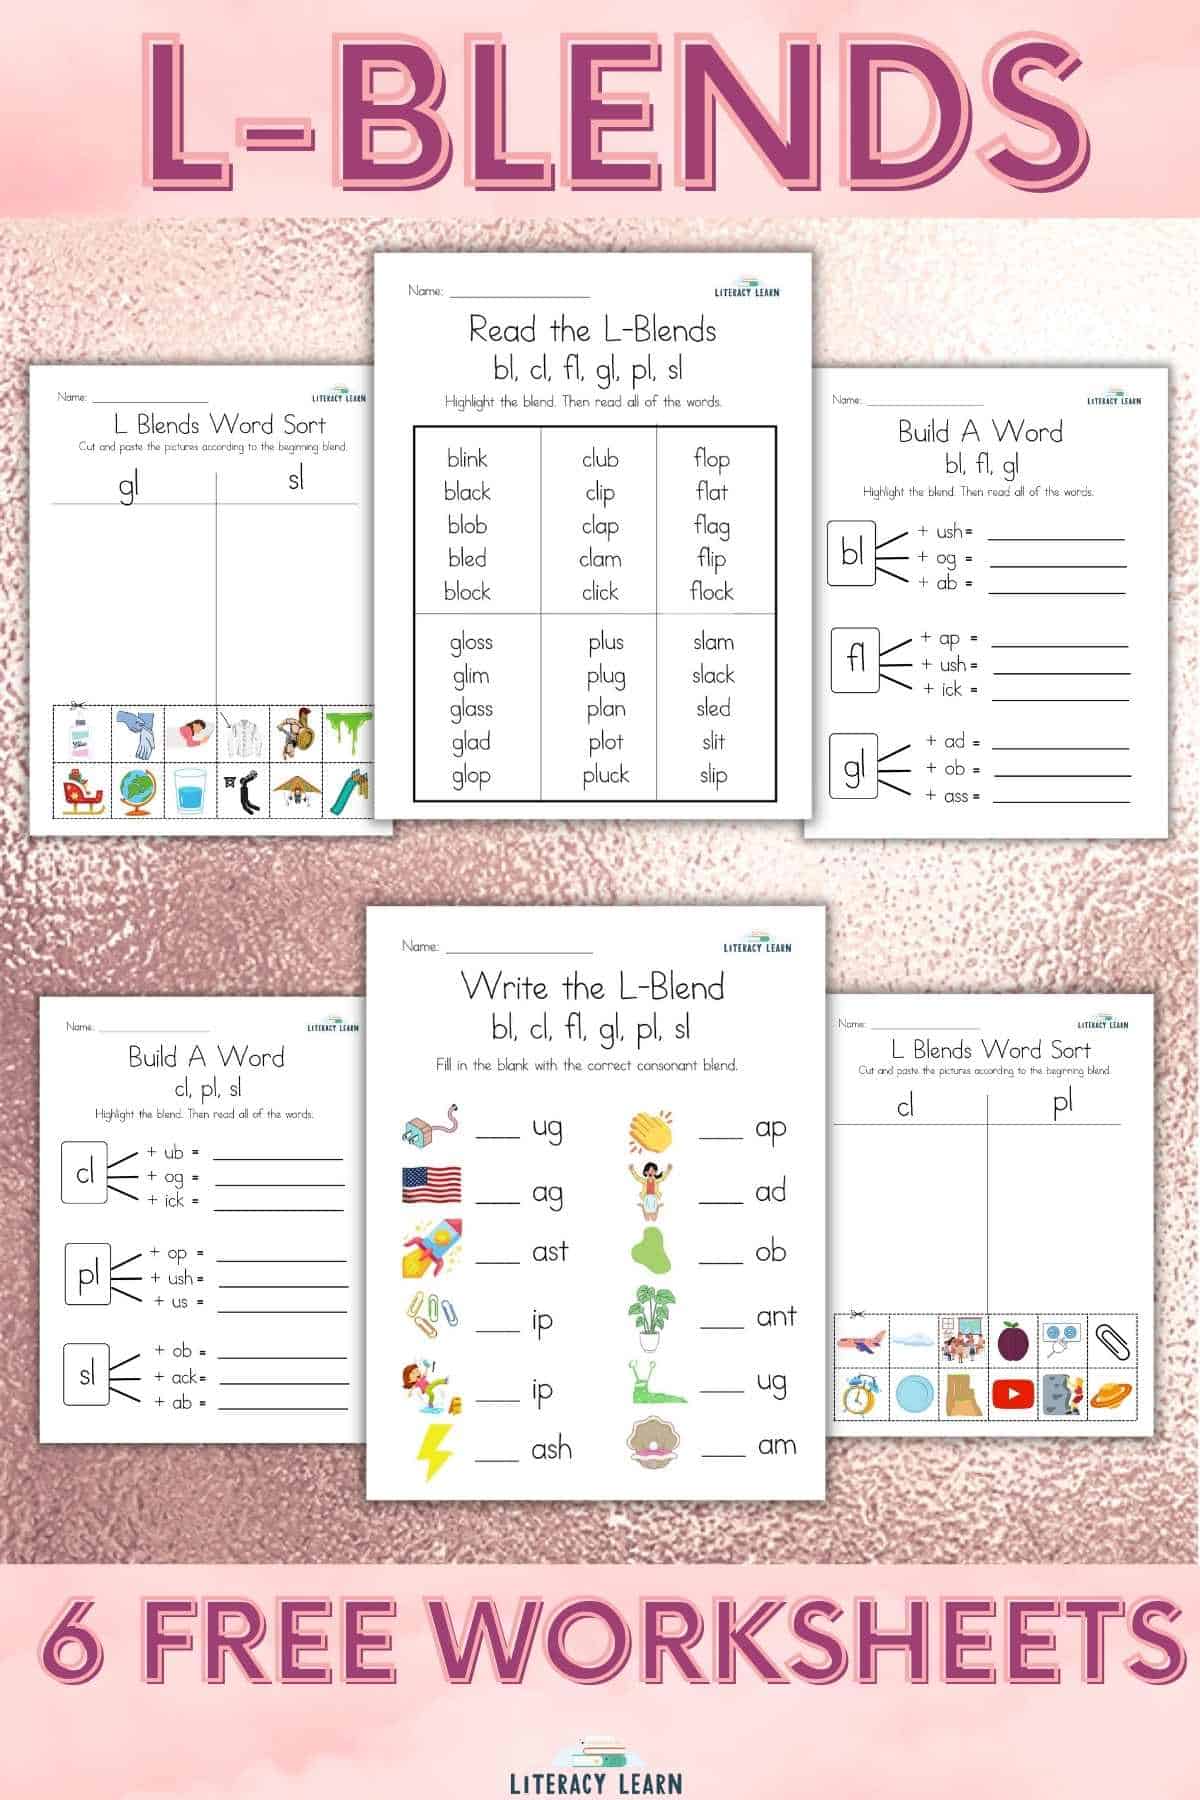 Sparkly pink graphic with 6 l-blends worksheets.